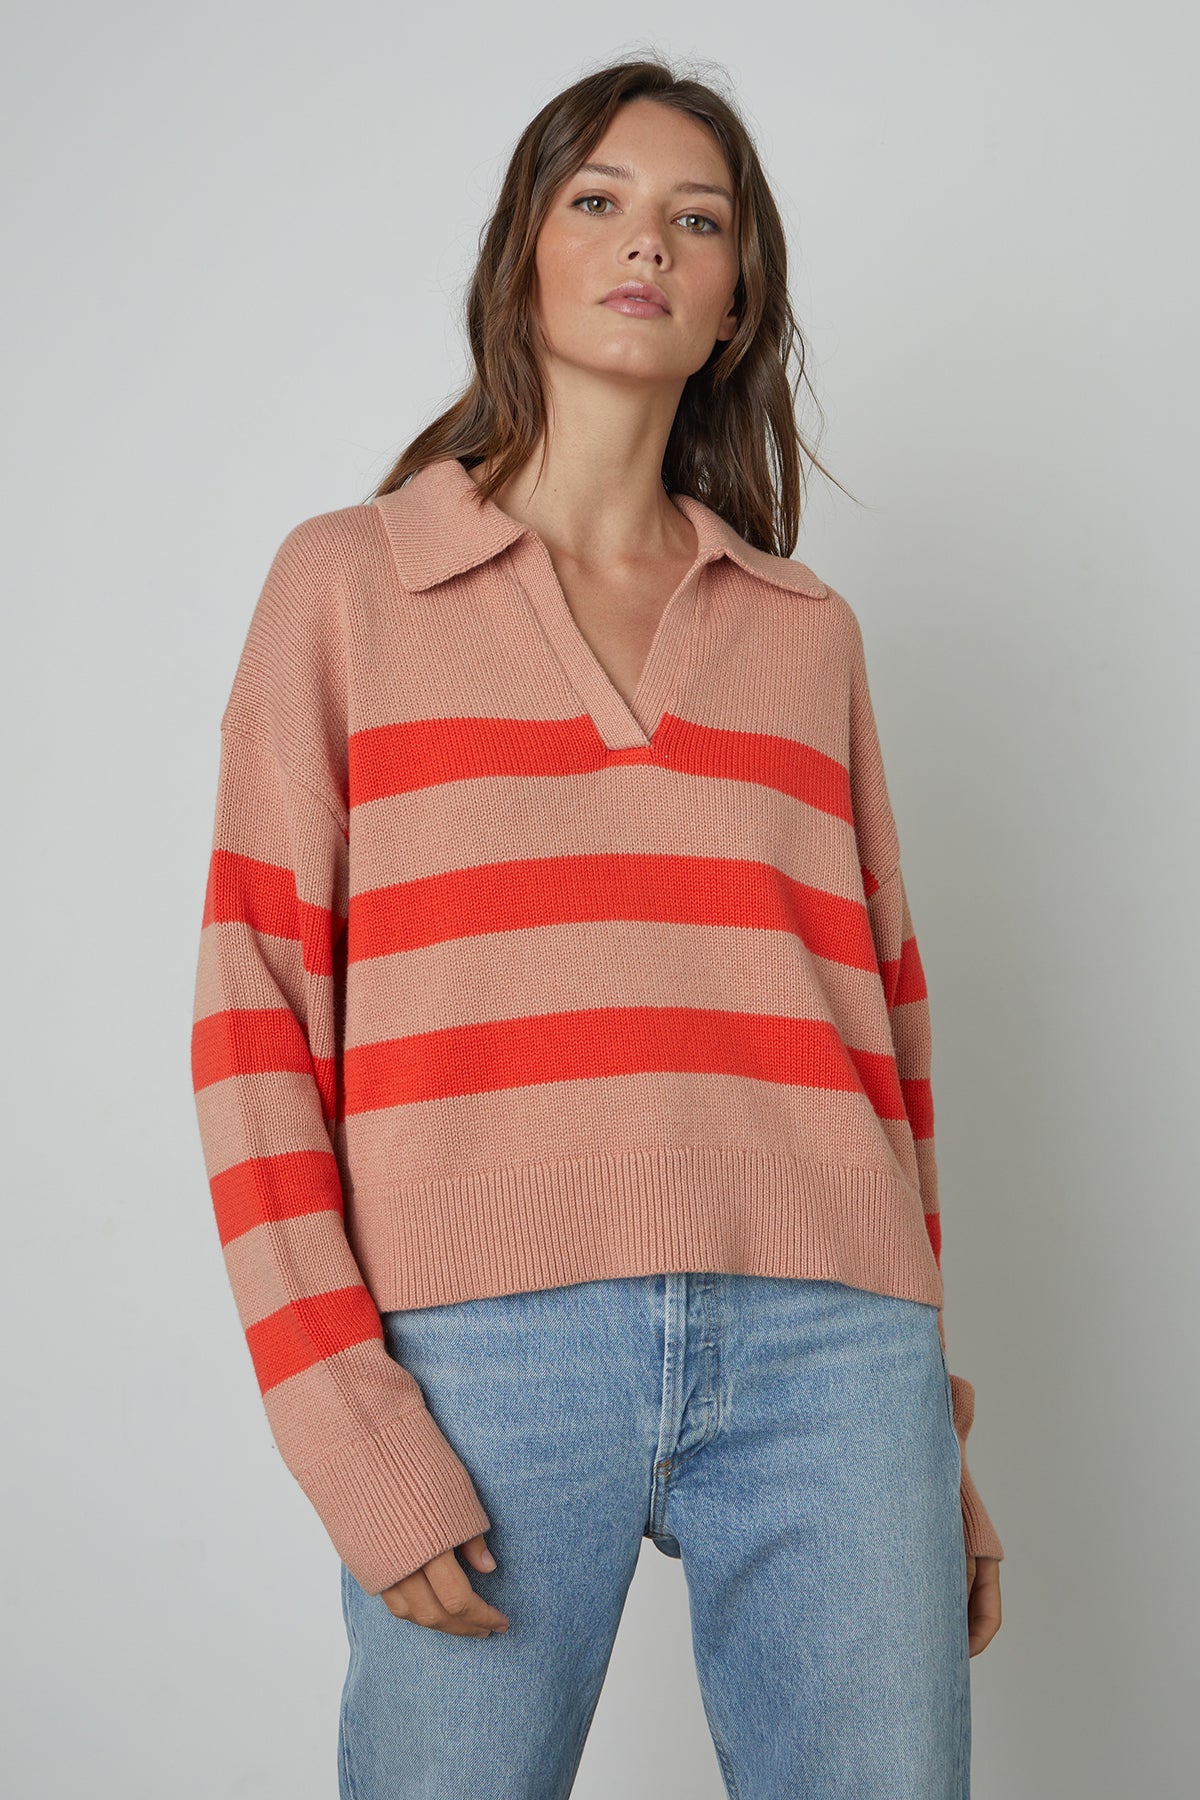 Lucie Striped Polo Sweater in Pink/Flame Front-25315481387201